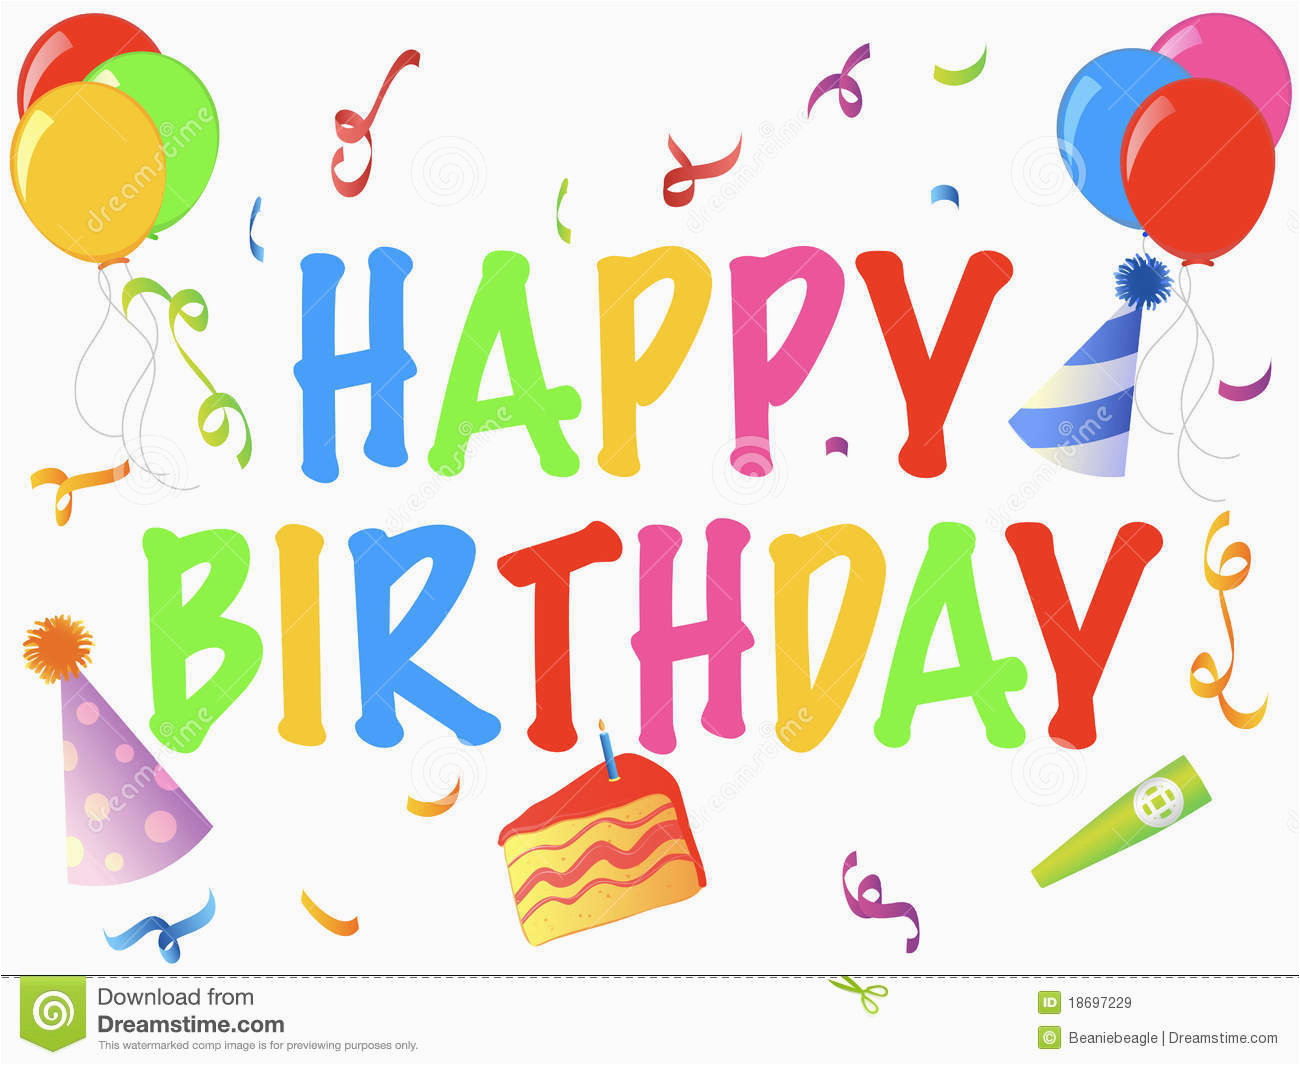 royalty free stock images happy birthday banner image18697229